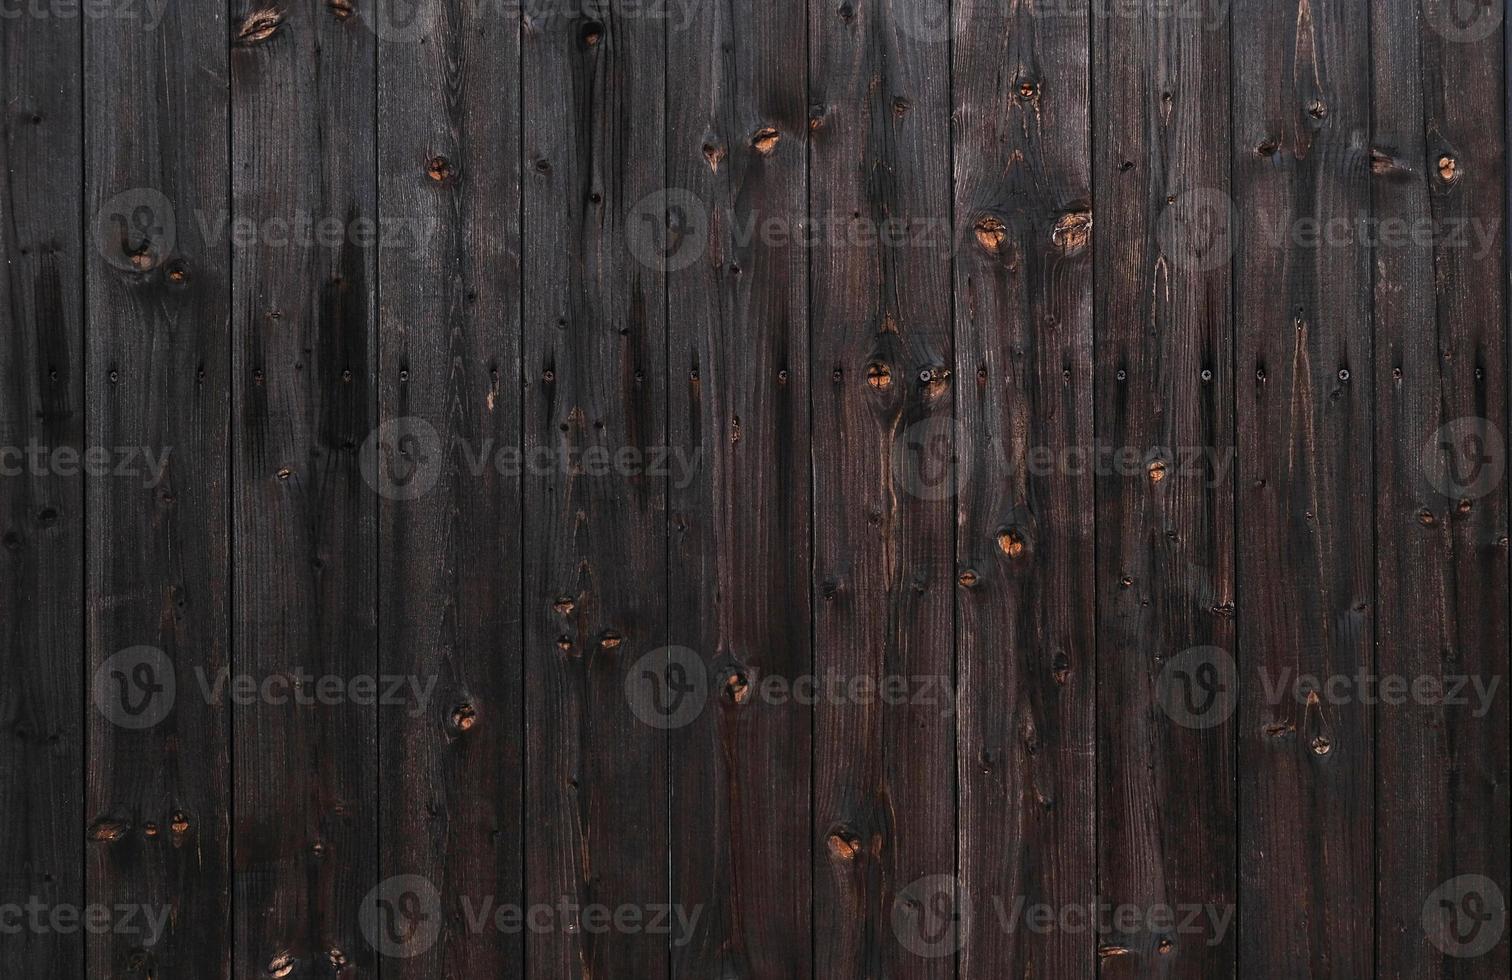 Natural Dark Wooden Background. Wooden rustic background. Old boards. Copy space for your text or image. Top view. Dark brown wood boards. Blank for design and require a wood grain. photo